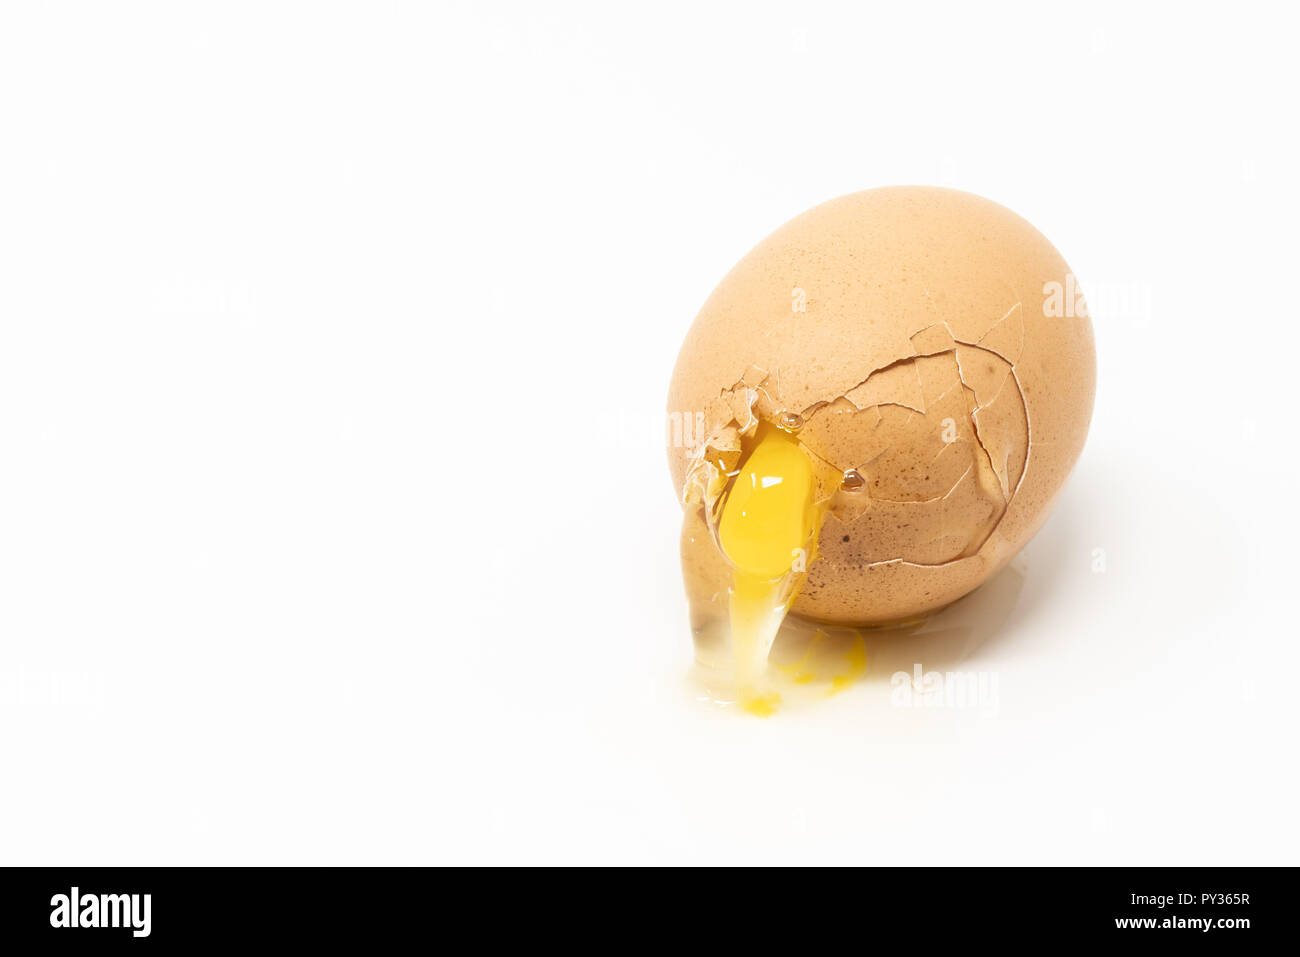 Broken brown egg on the white surface. Yolk spilling out through the crack. Stock Photo